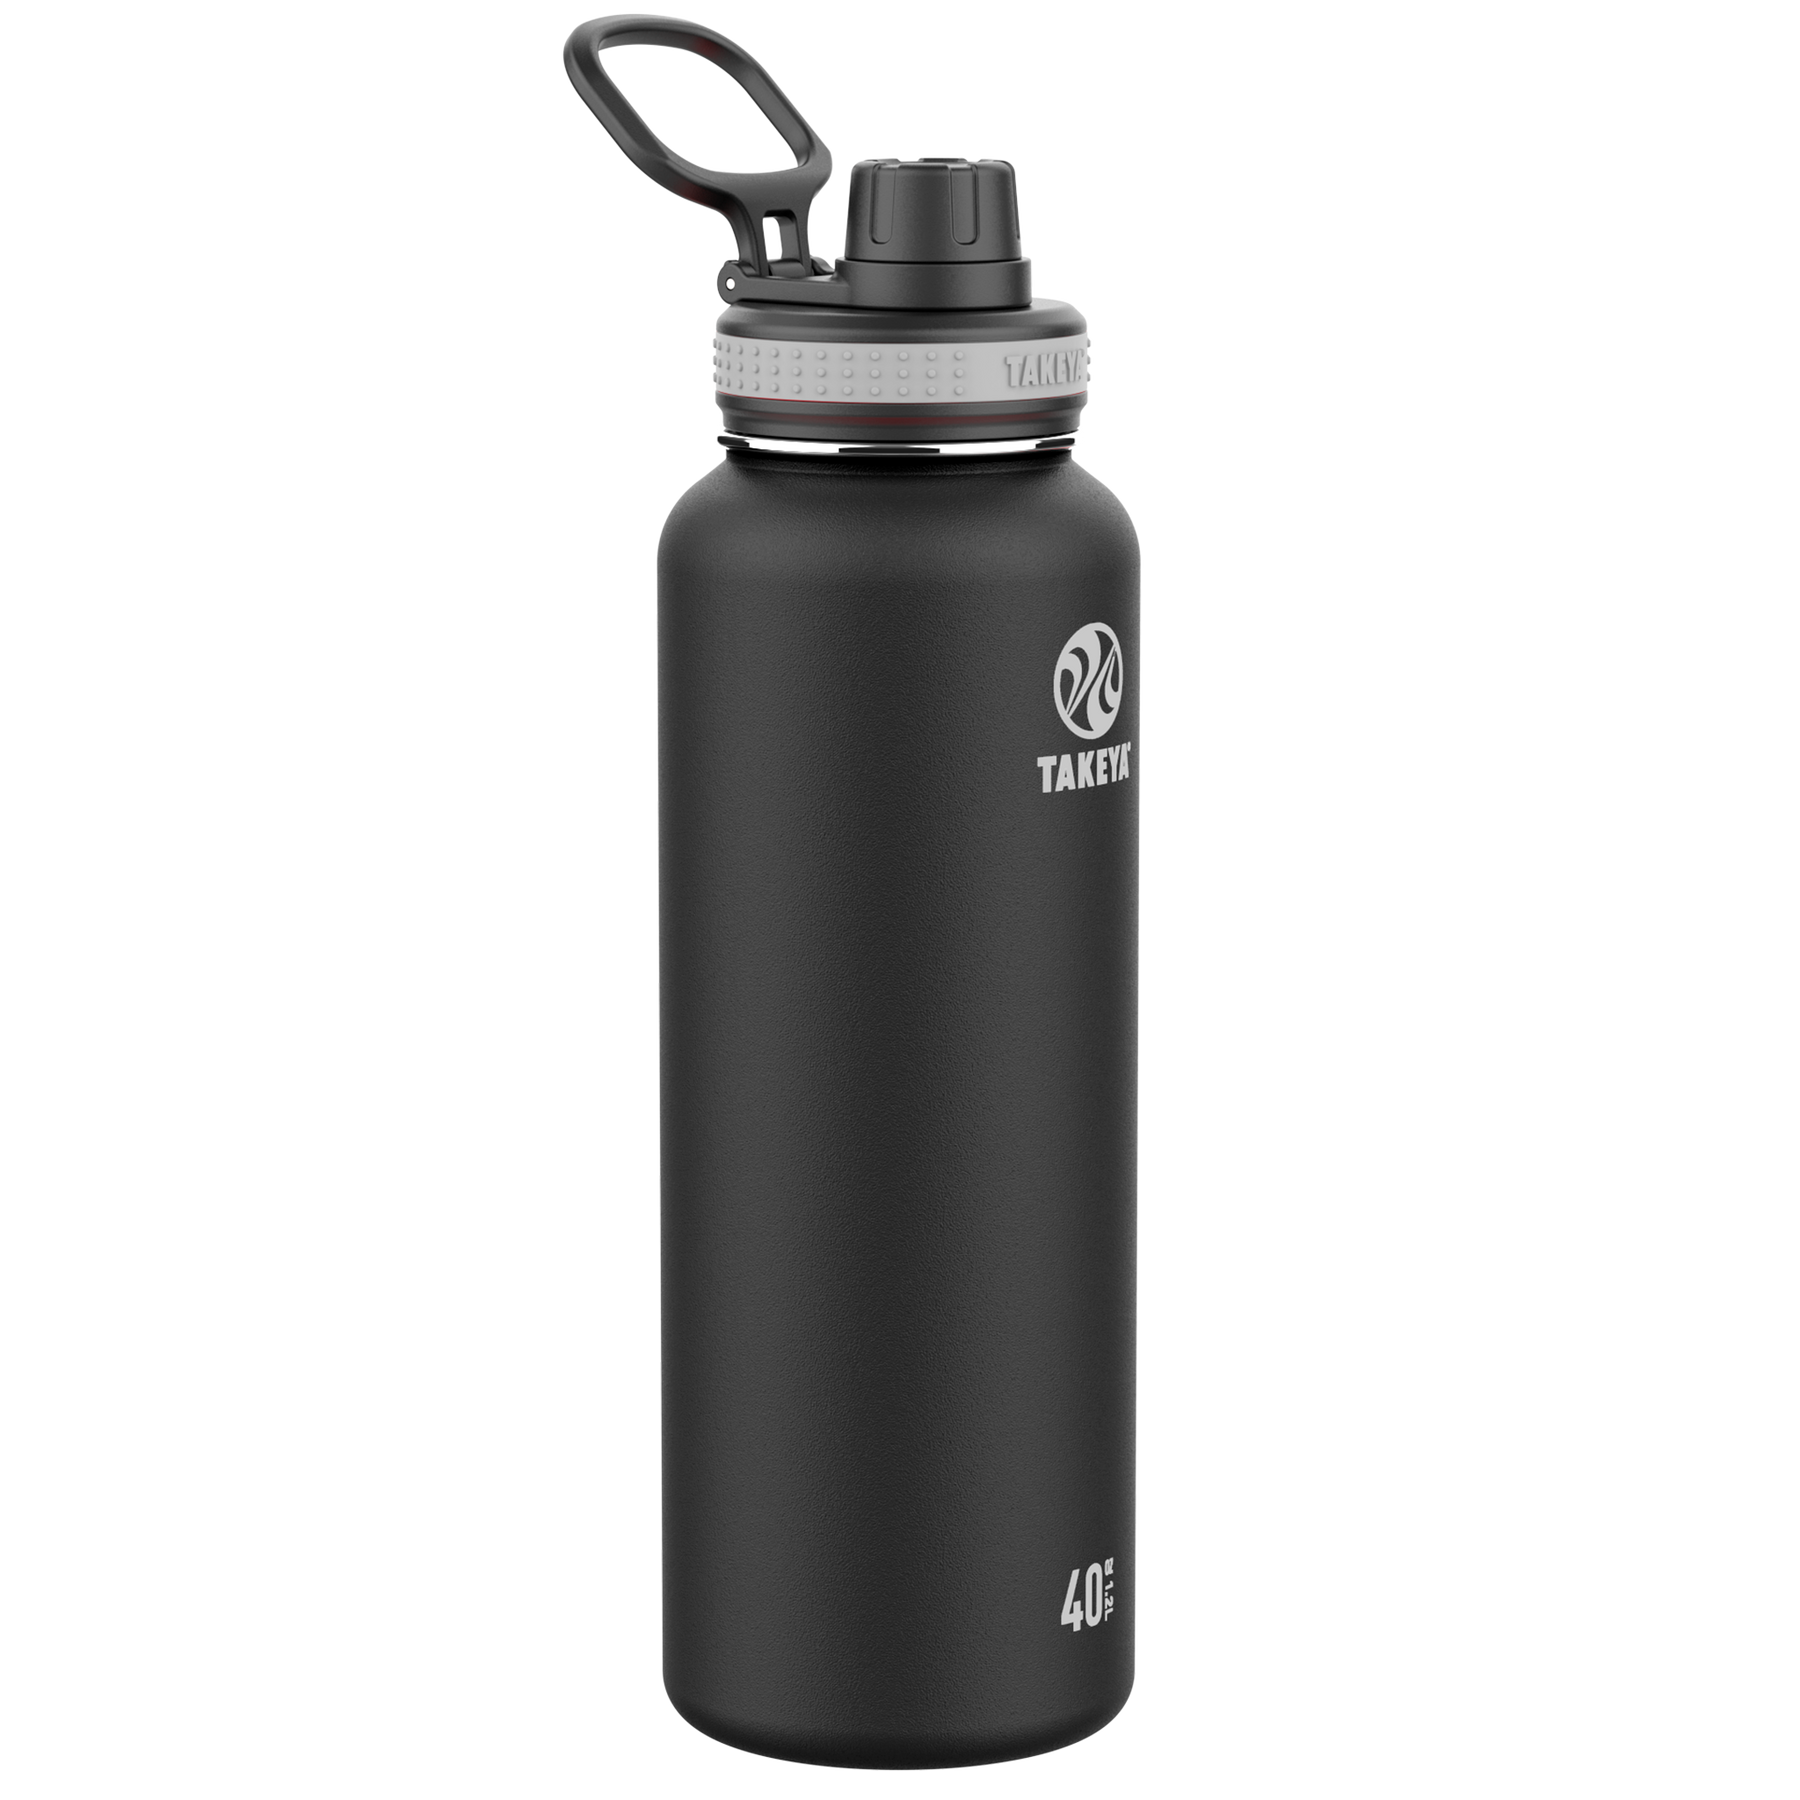 Original 40 oz Insulated Stainless Steel Water Bottles